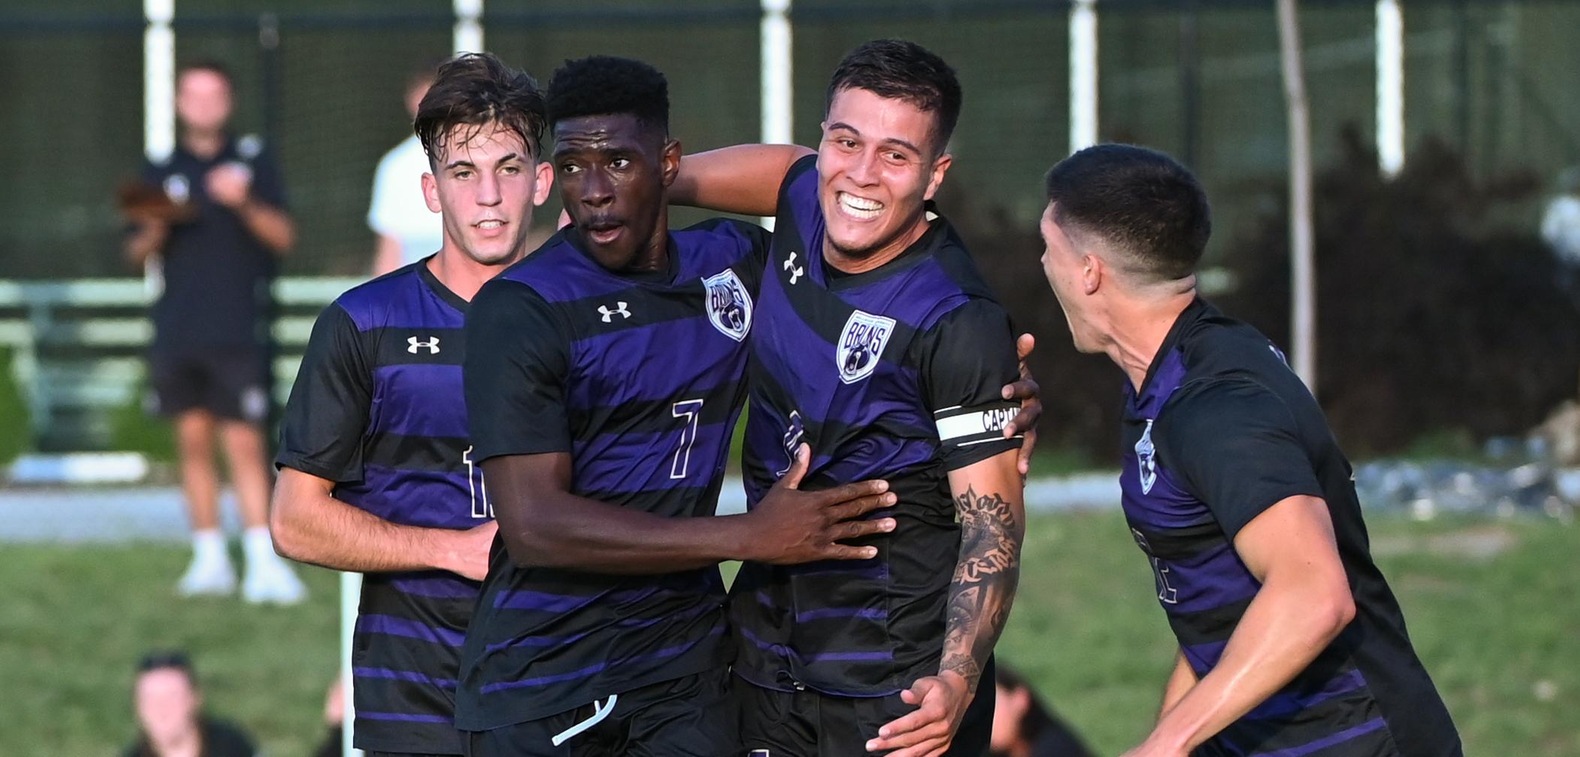 Sebastian Zapata is congratulated by teammates after scoring BU's first goal of the year in the opening minutes of Thursday's game against Doane.